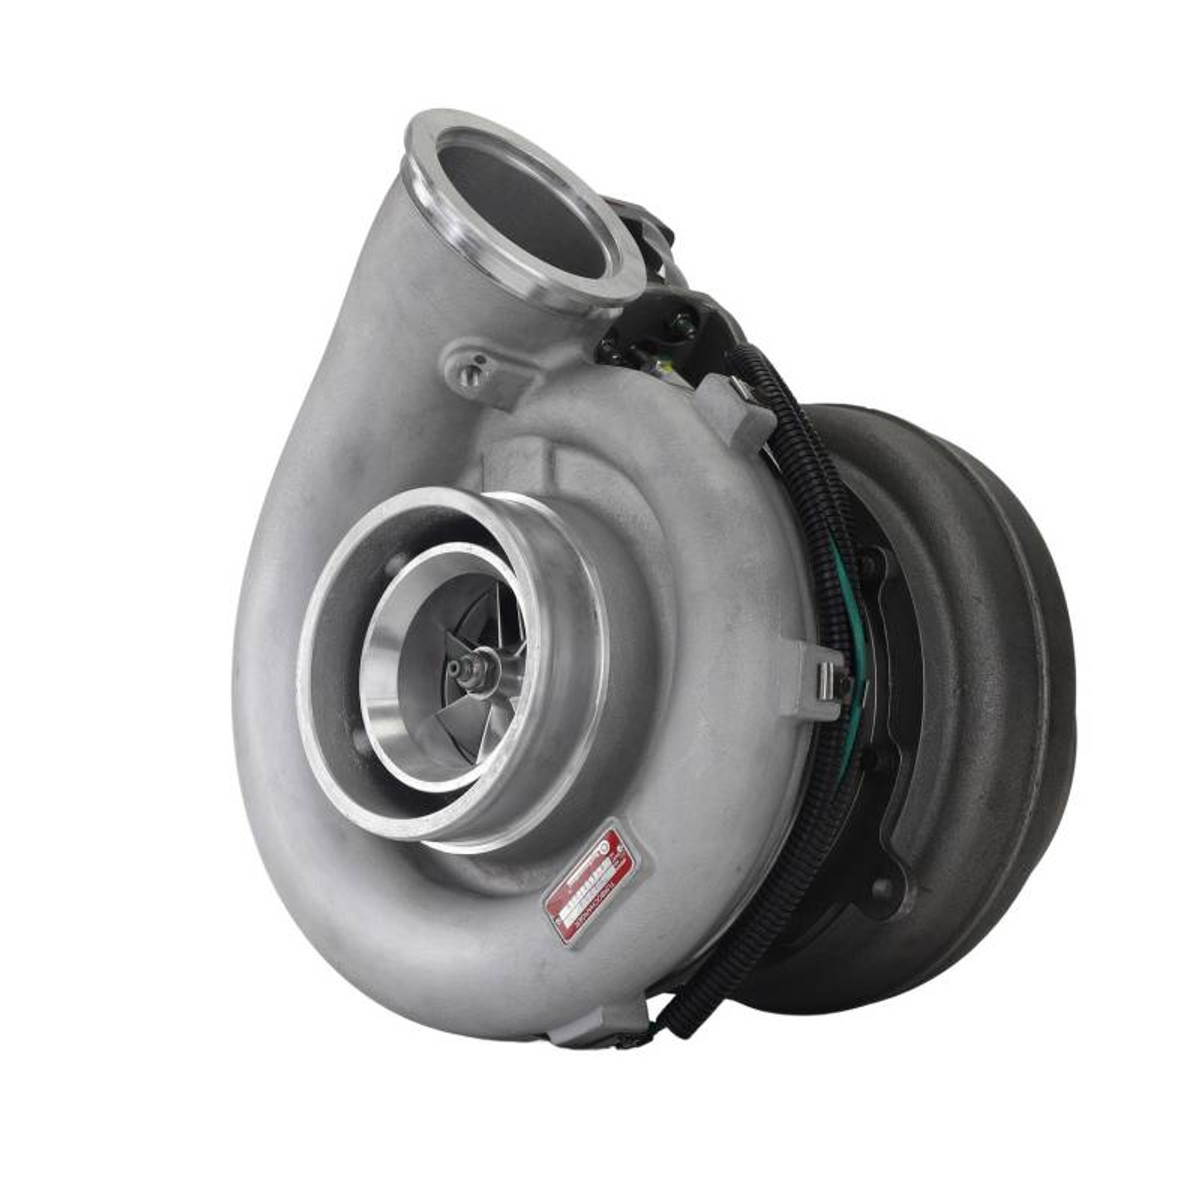 Rotomaster New Turbocharger - 2007-2009 Detroit Diesel Series 60 14.0L A1450101N